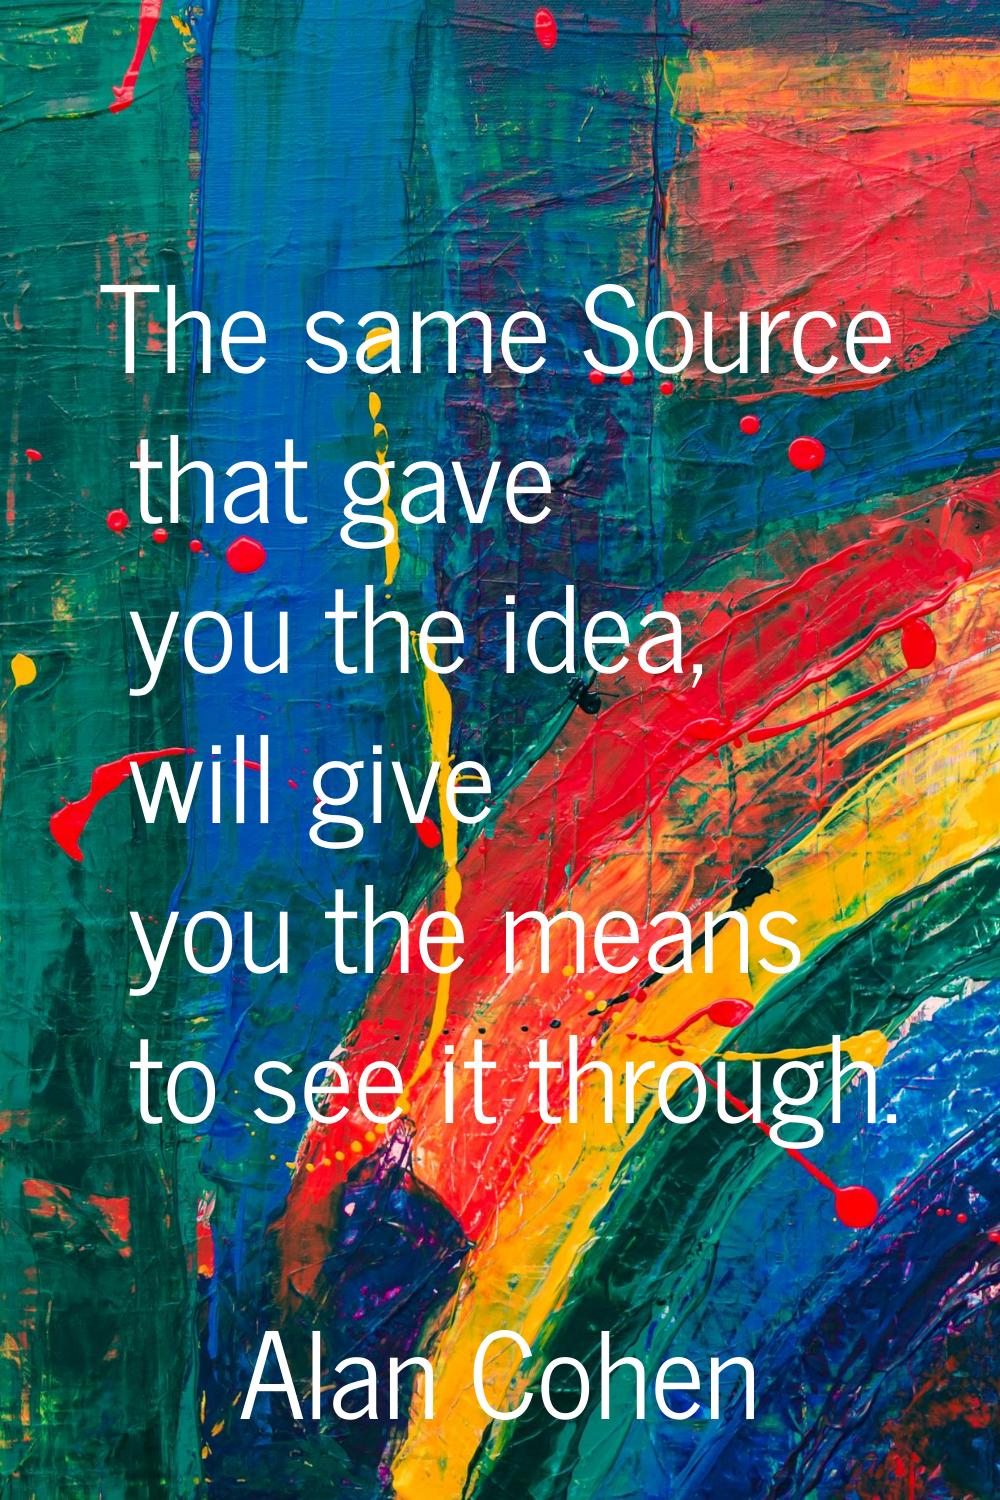 The same Source that gave you the idea, will give you the means to see it through.